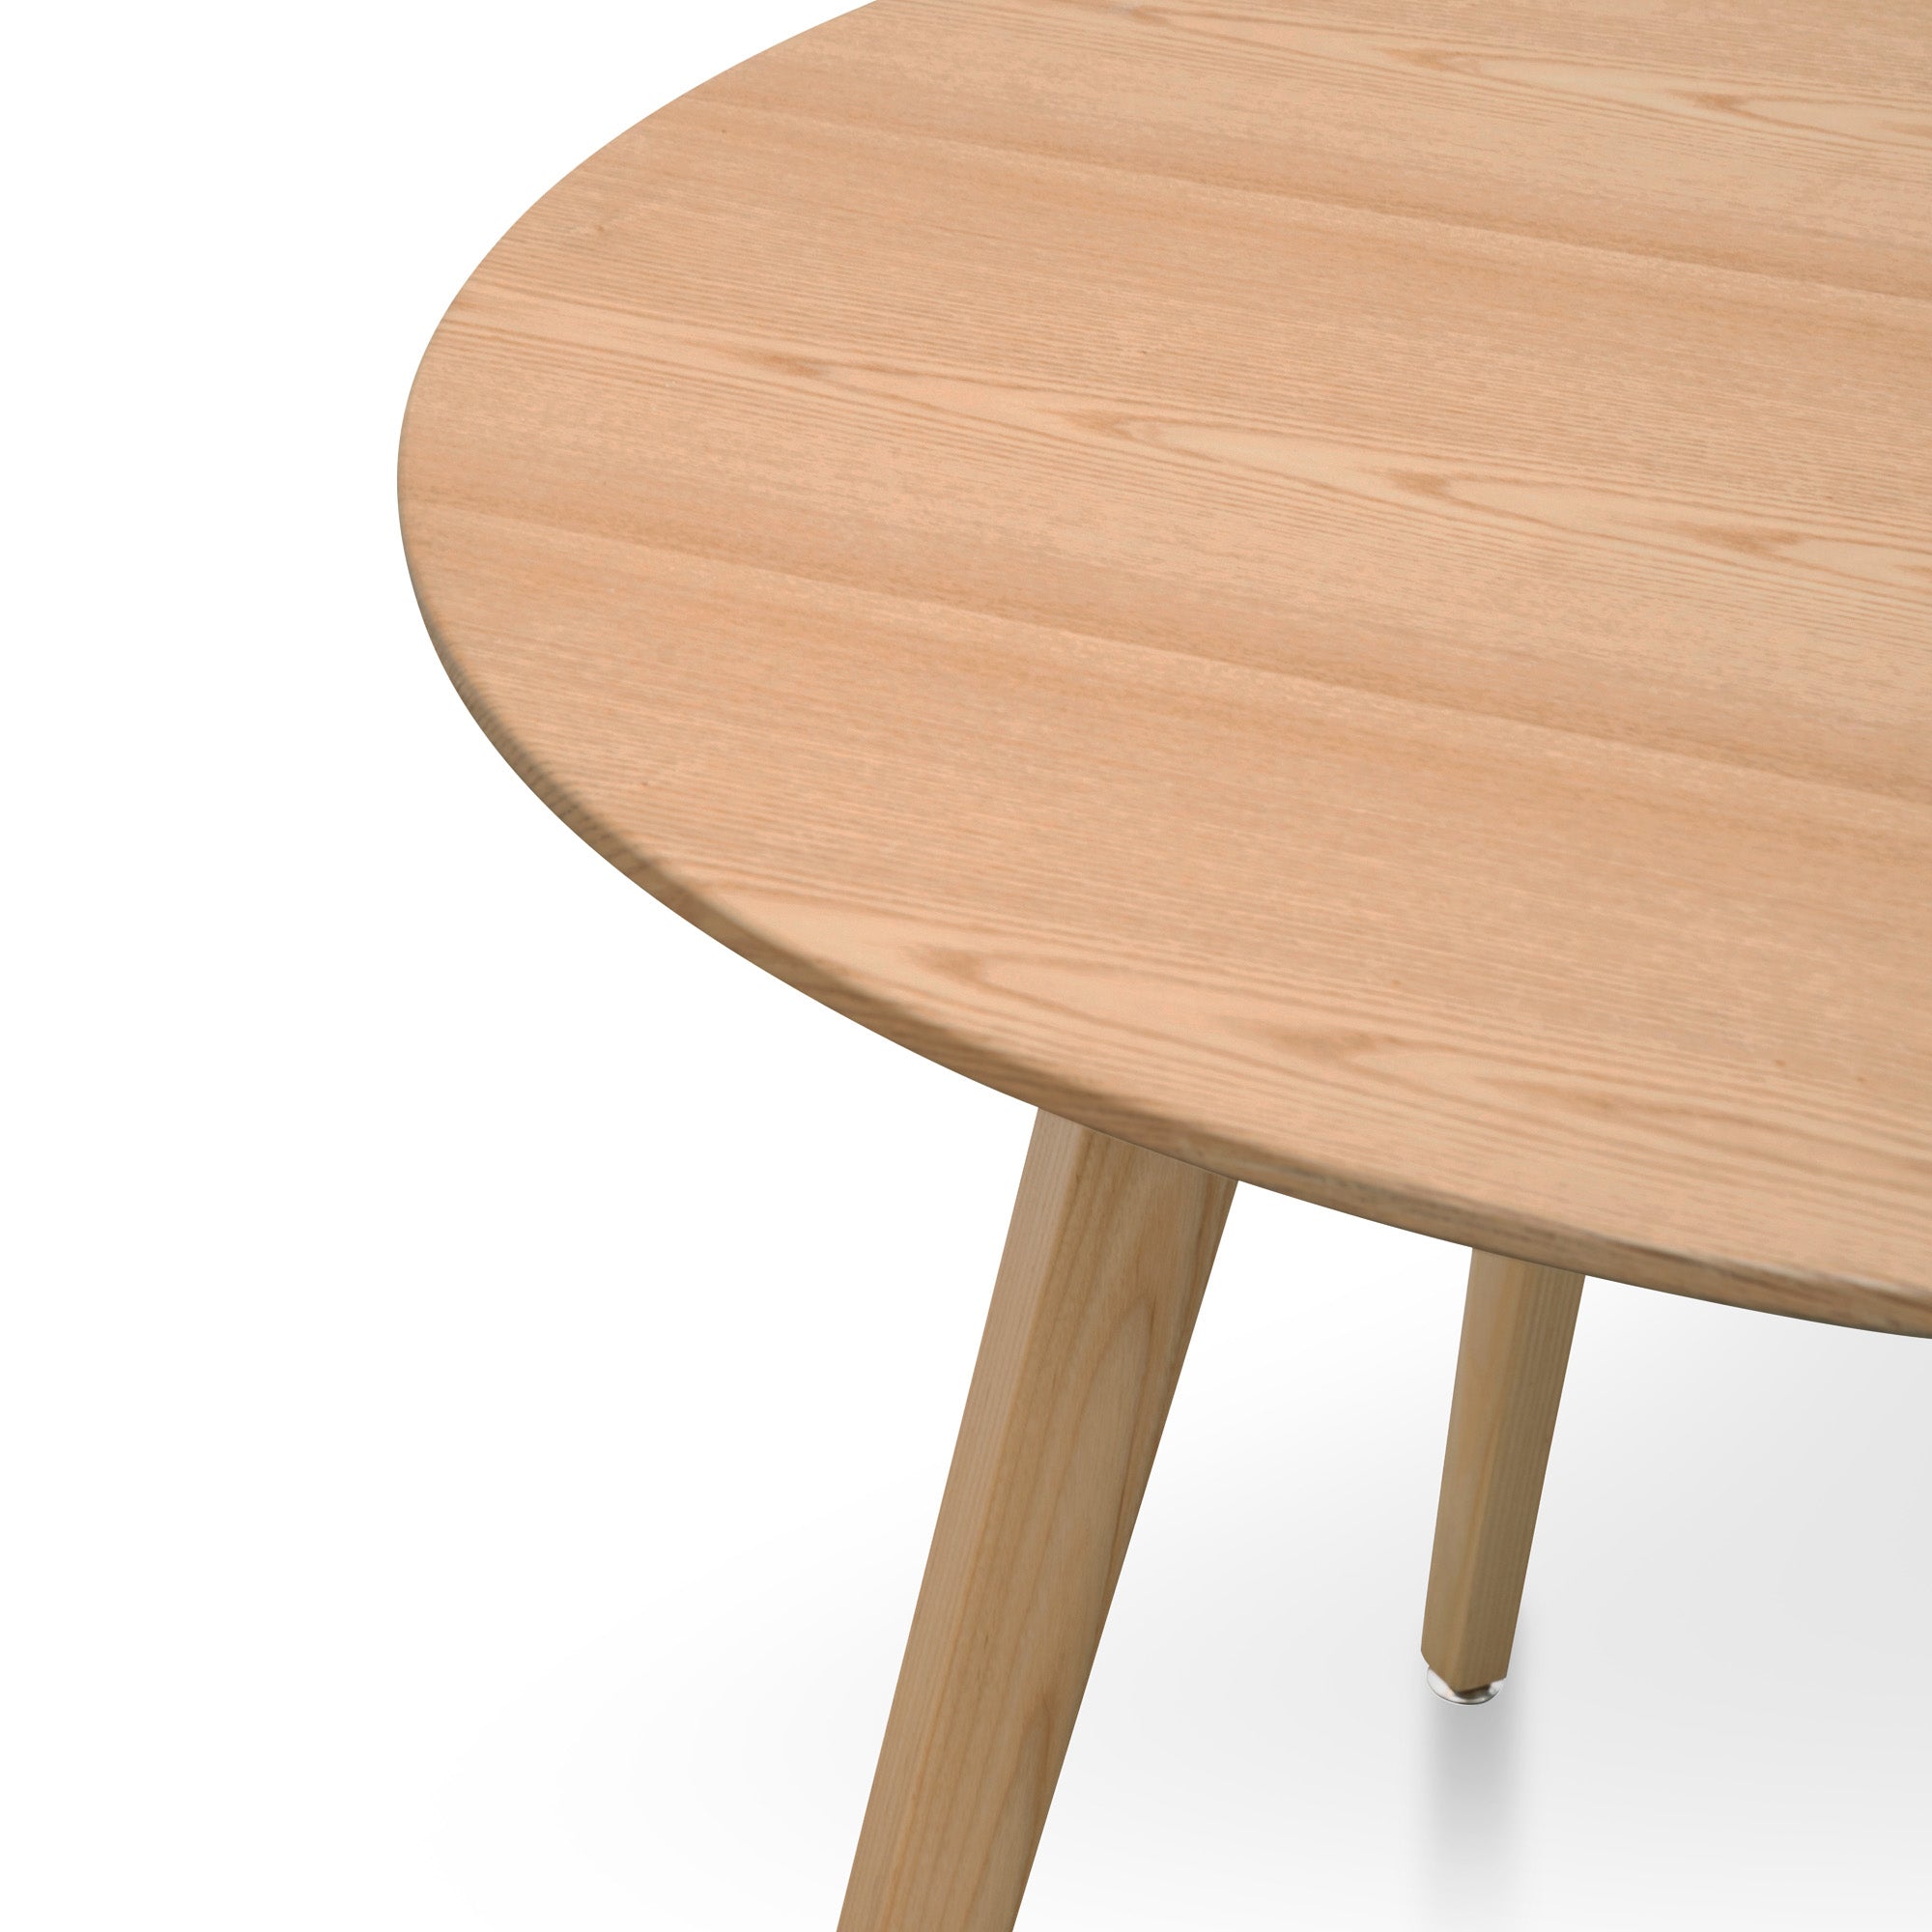 Smith 100cm Round Wooden Dining Table - Natural - Dining Tables